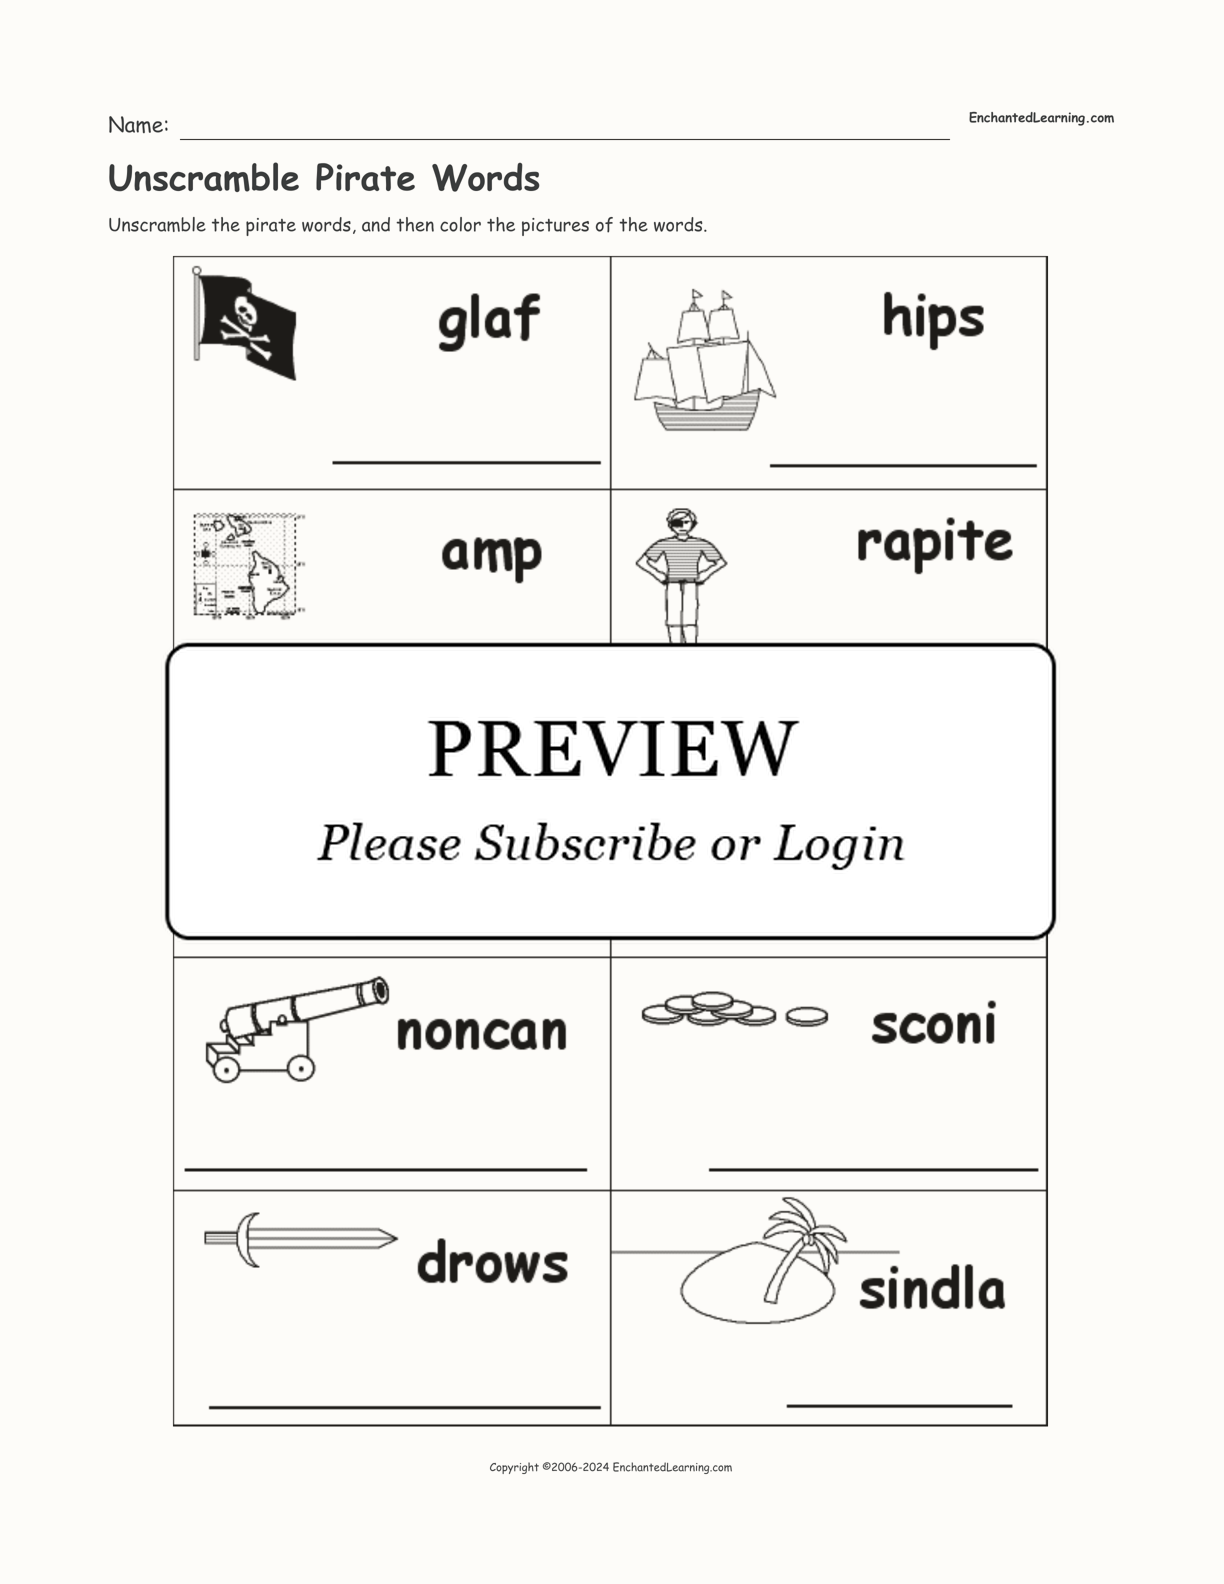 Unscramble Pirate Words interactive worksheet page 1